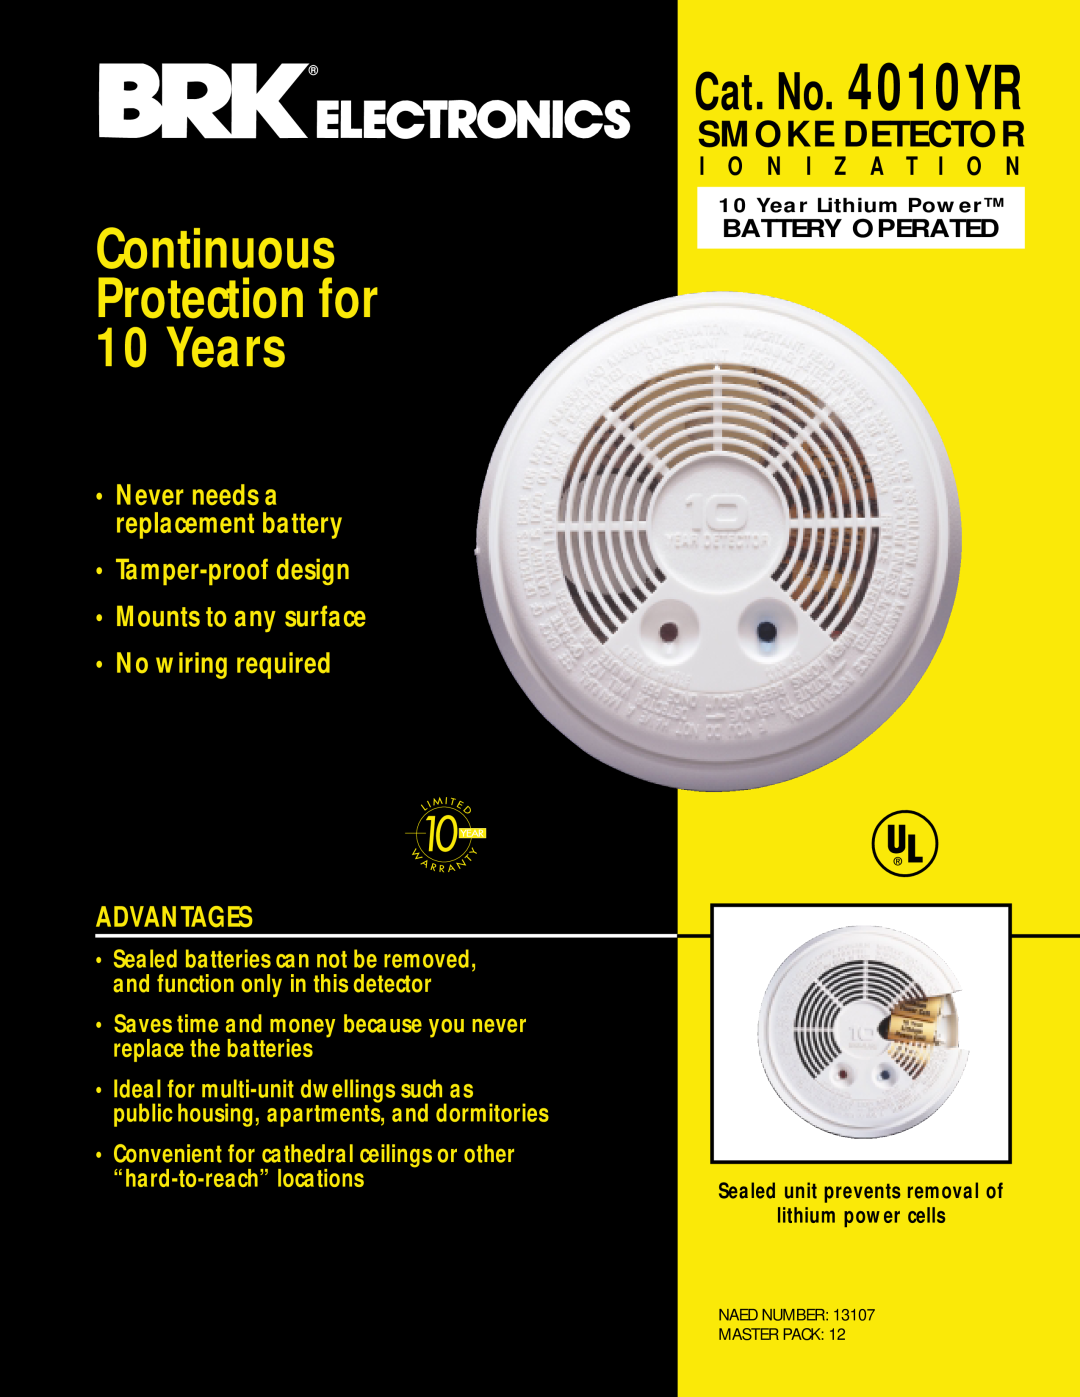 BRK electronic manual Cat. No. 4010YR, Continuous Protection for 10 Years, Smoke Detector, Advantages, Battery Operated 